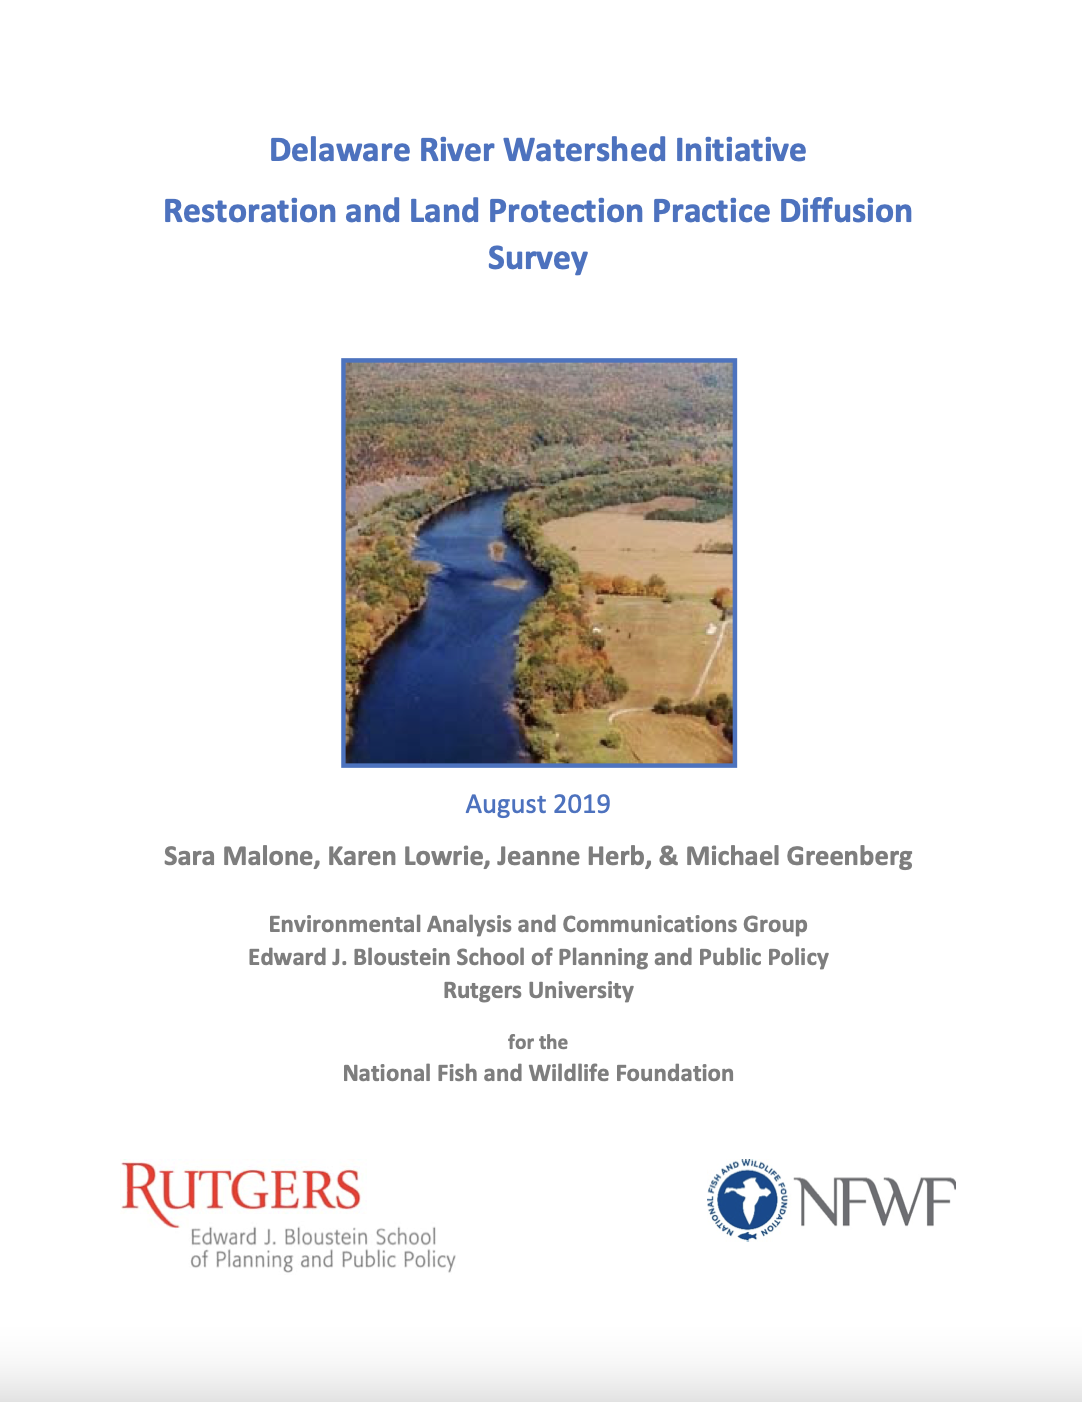 Delaware River Watershed Initiative Restoration and Land Protection Practice Diffusion Survey